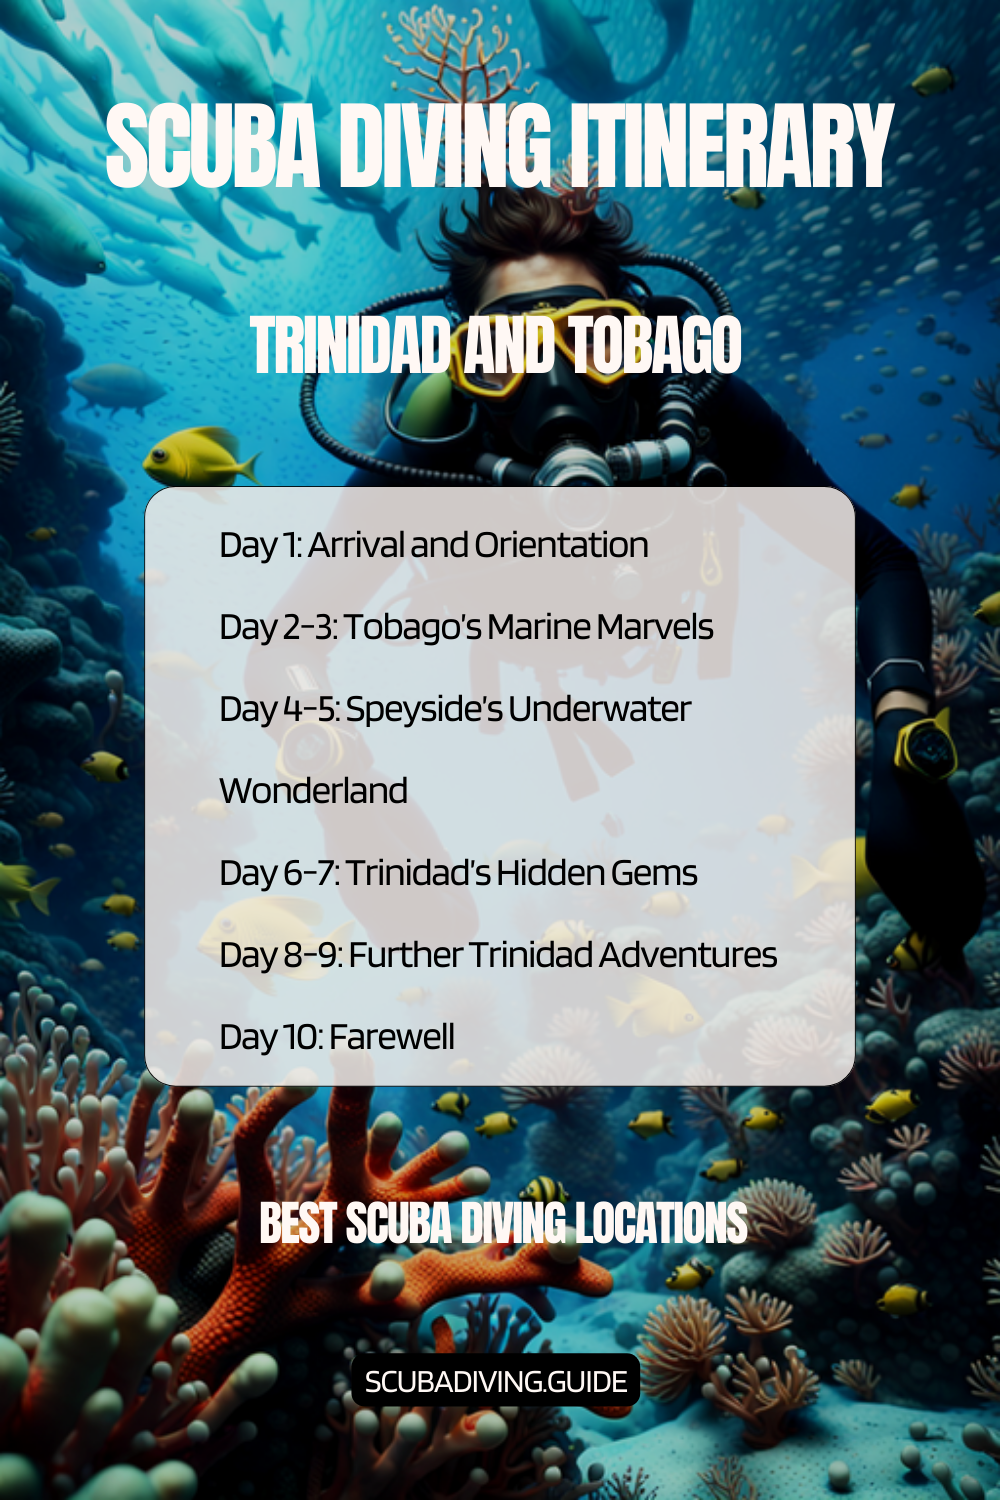 Trinidad and Tobago Recommended Diving Itinerary